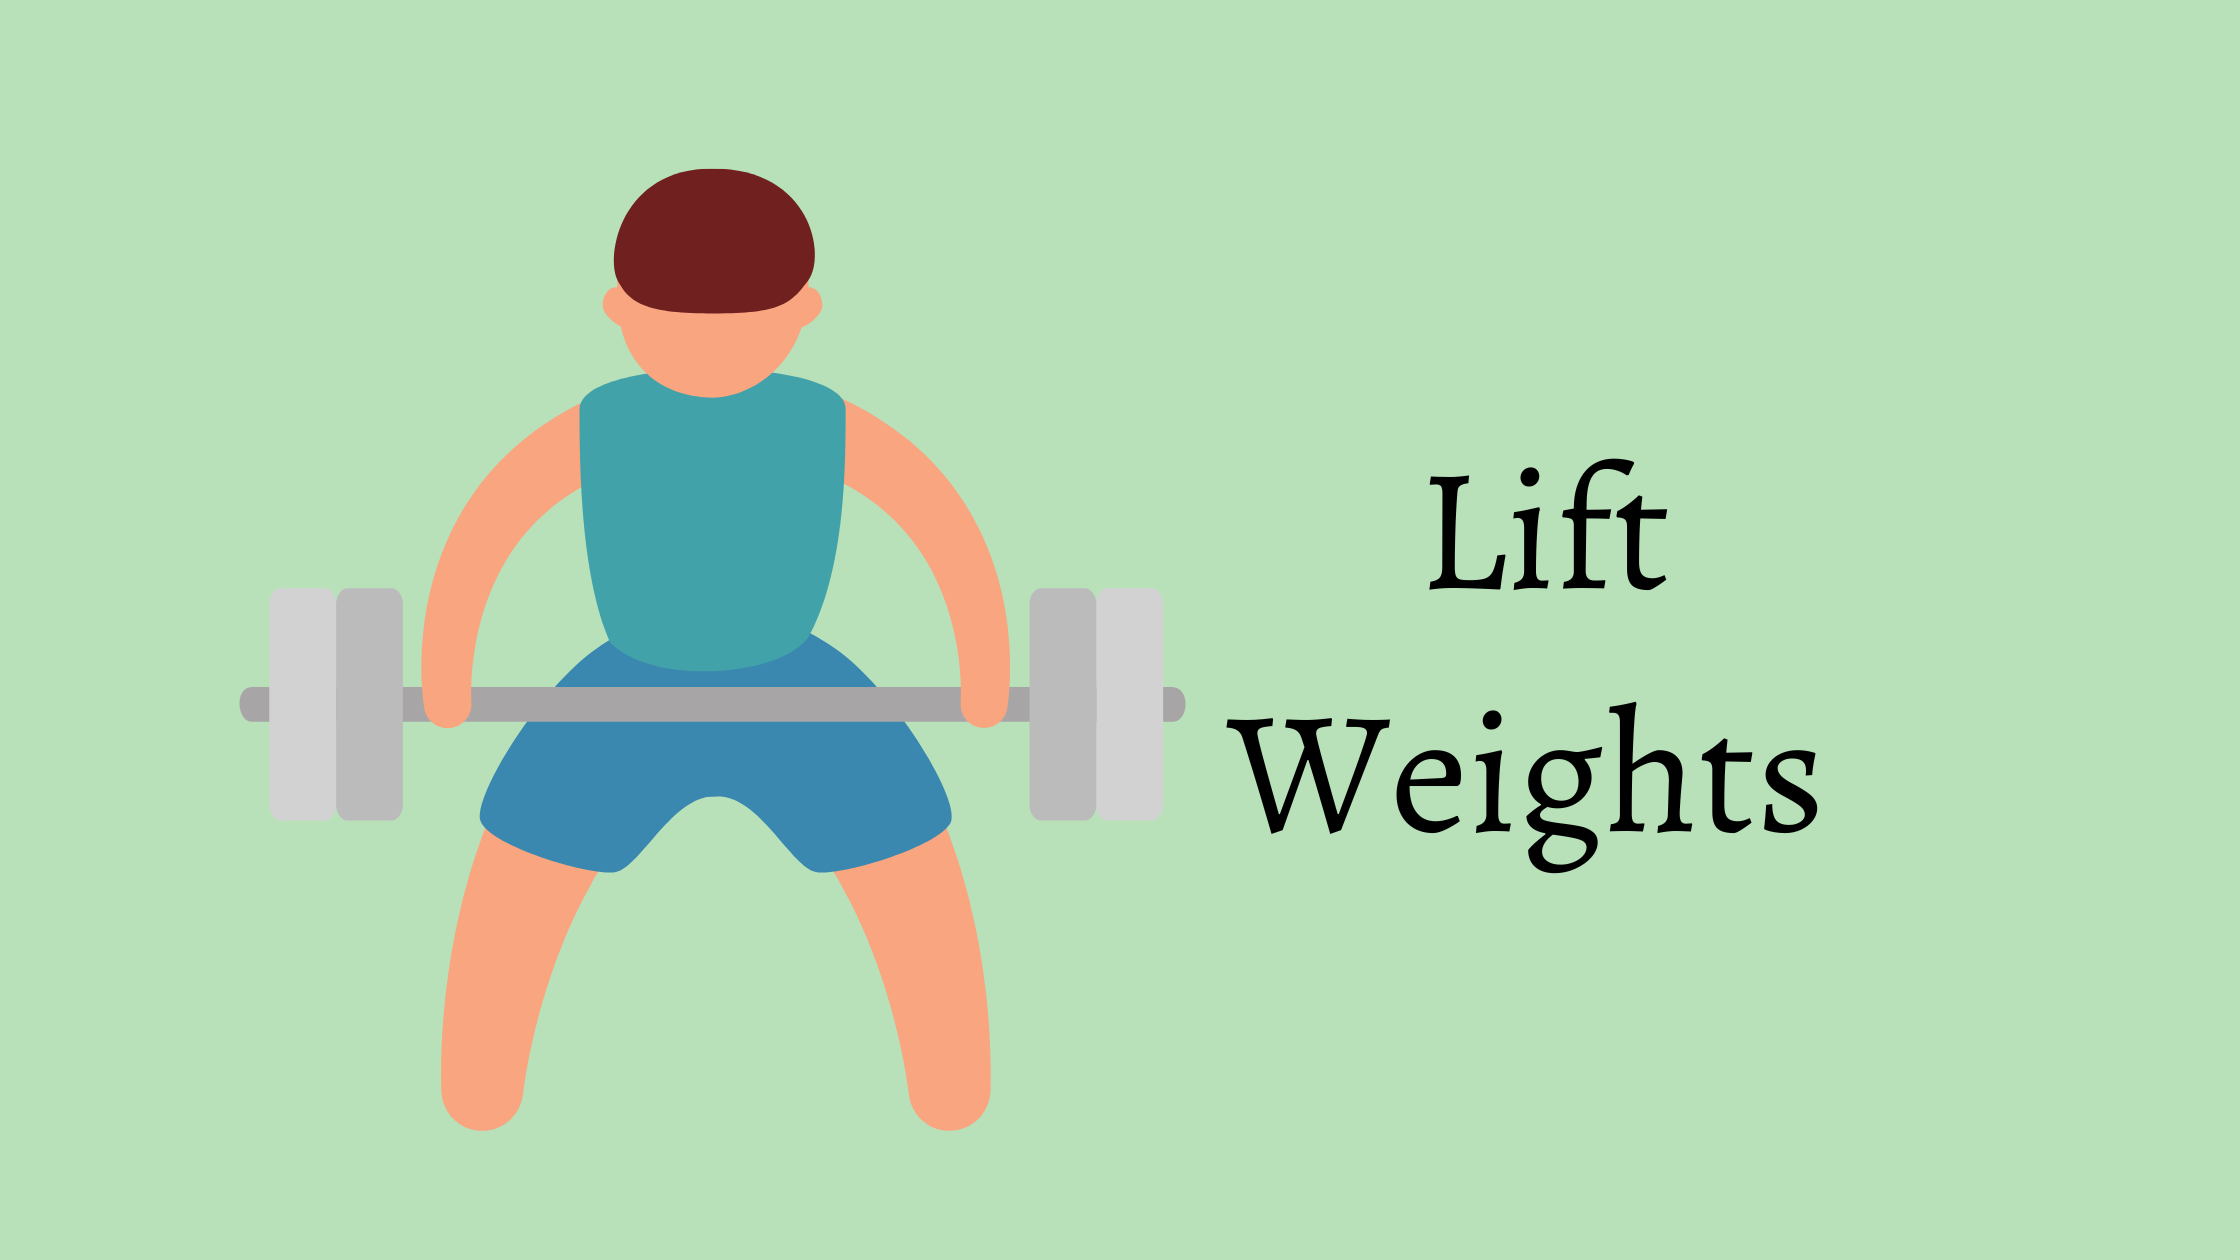  Lift Weights Safely